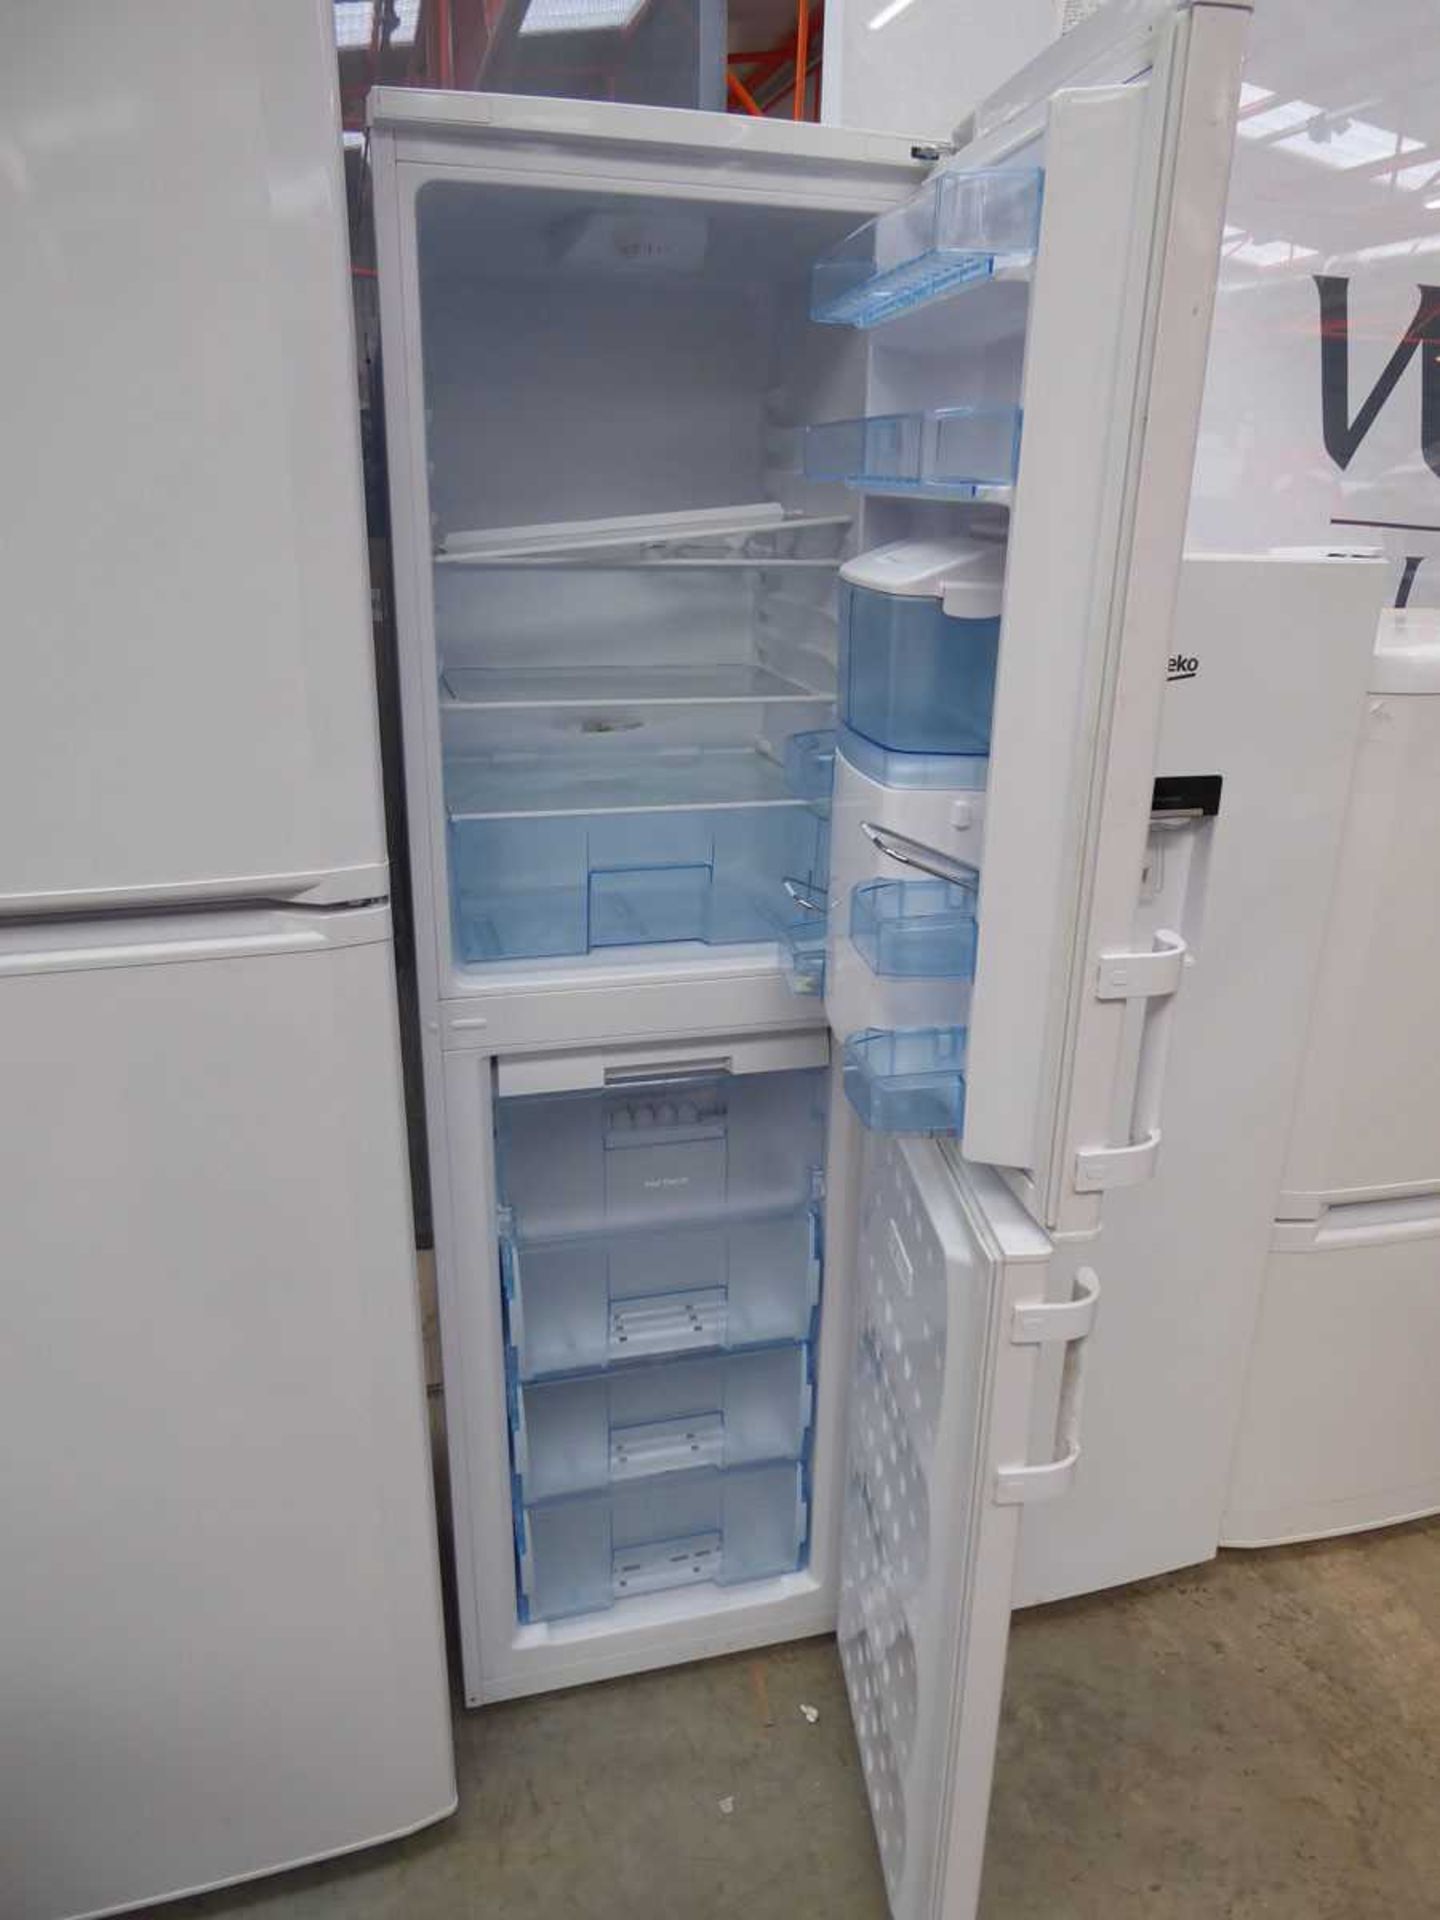 Beko A Class Frost Free fridge freezer in white with built in water dispenser - Image 2 of 2